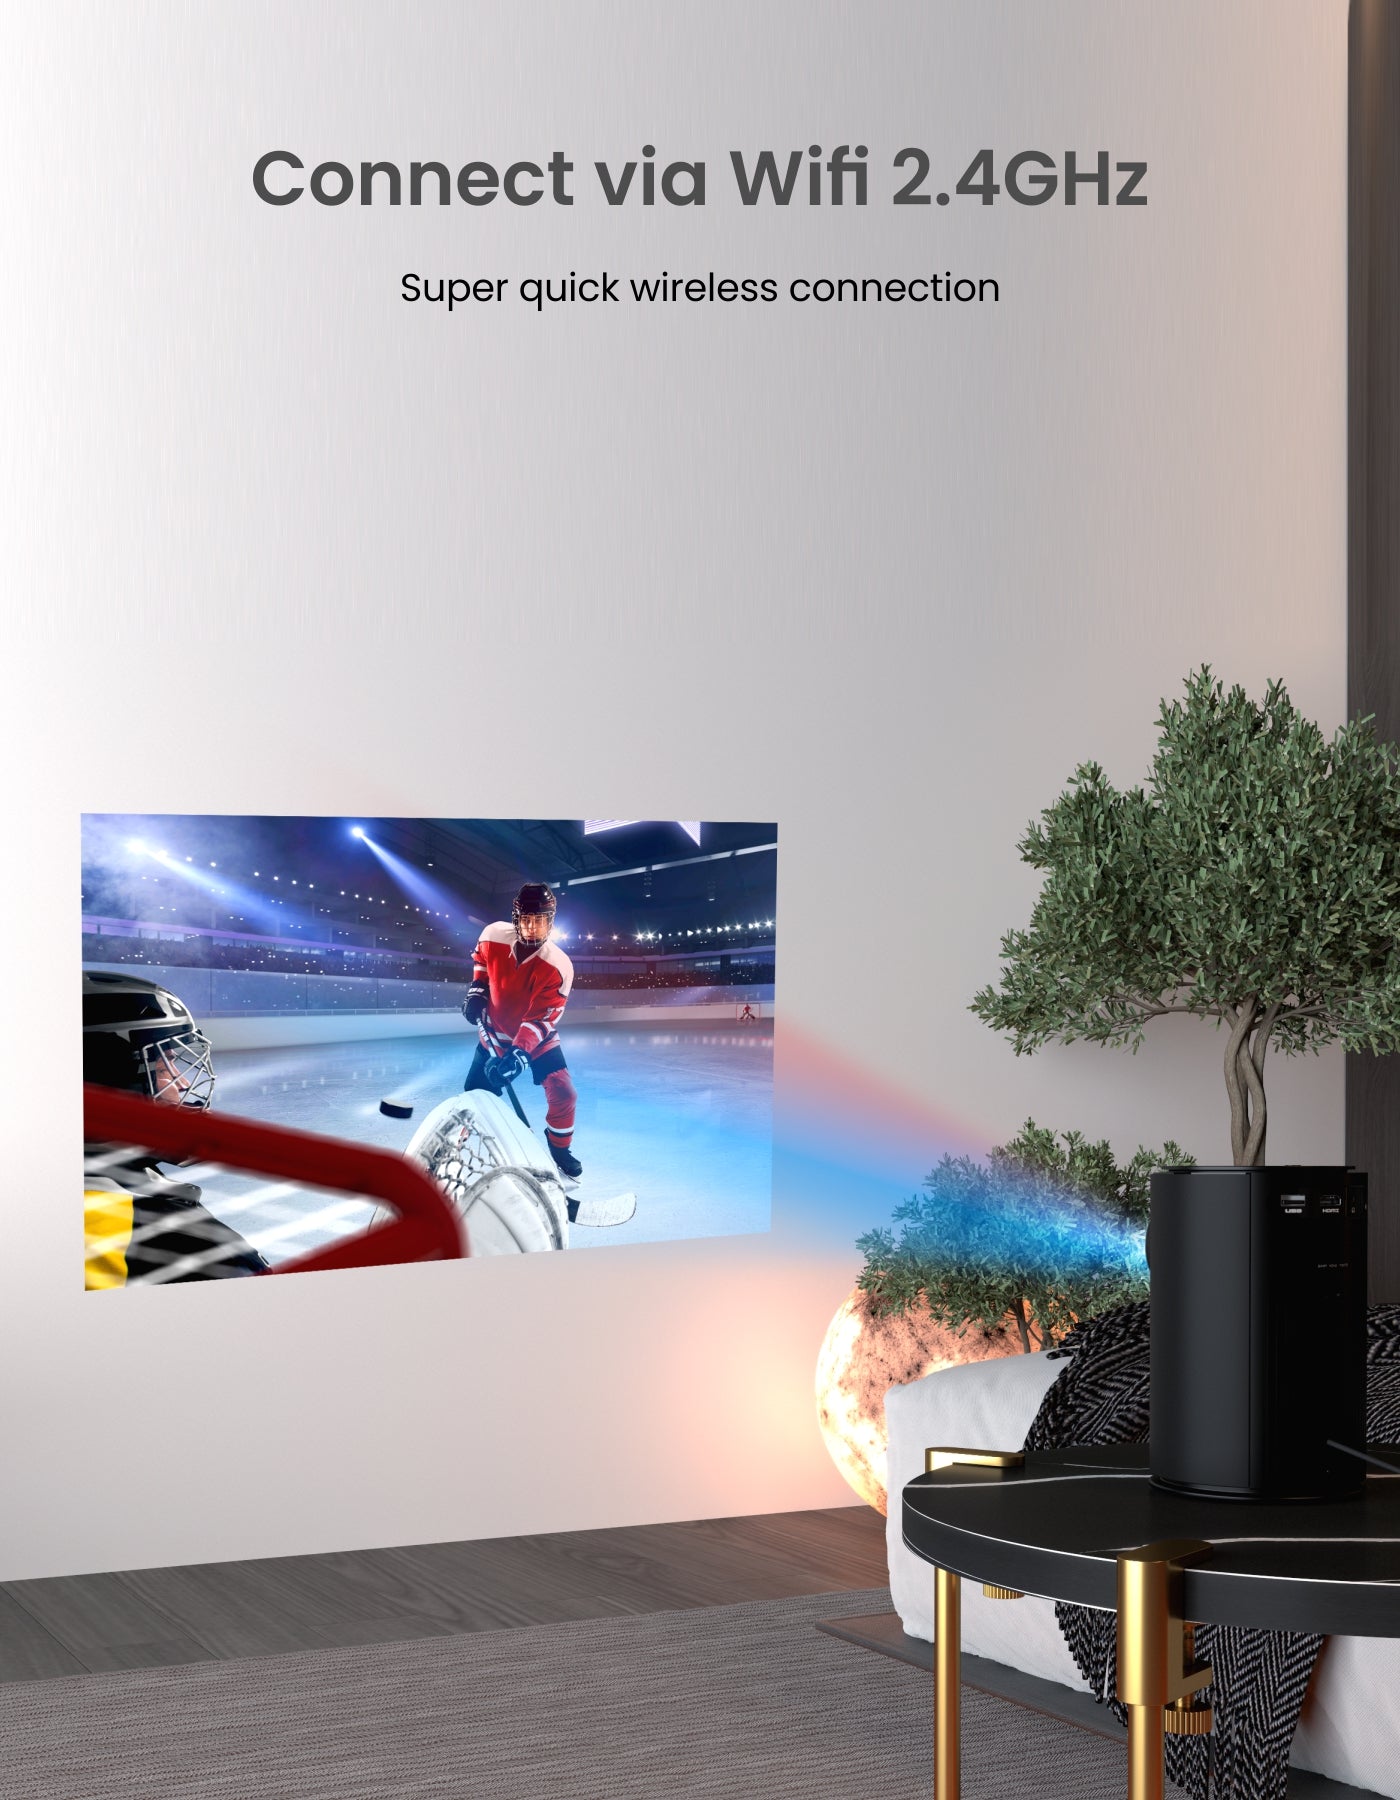 Portronics Beem 410 mini projector for home comes with flexible screen size option for creating ideal viewing experience| Buy mini wi-fi projector for home at best price